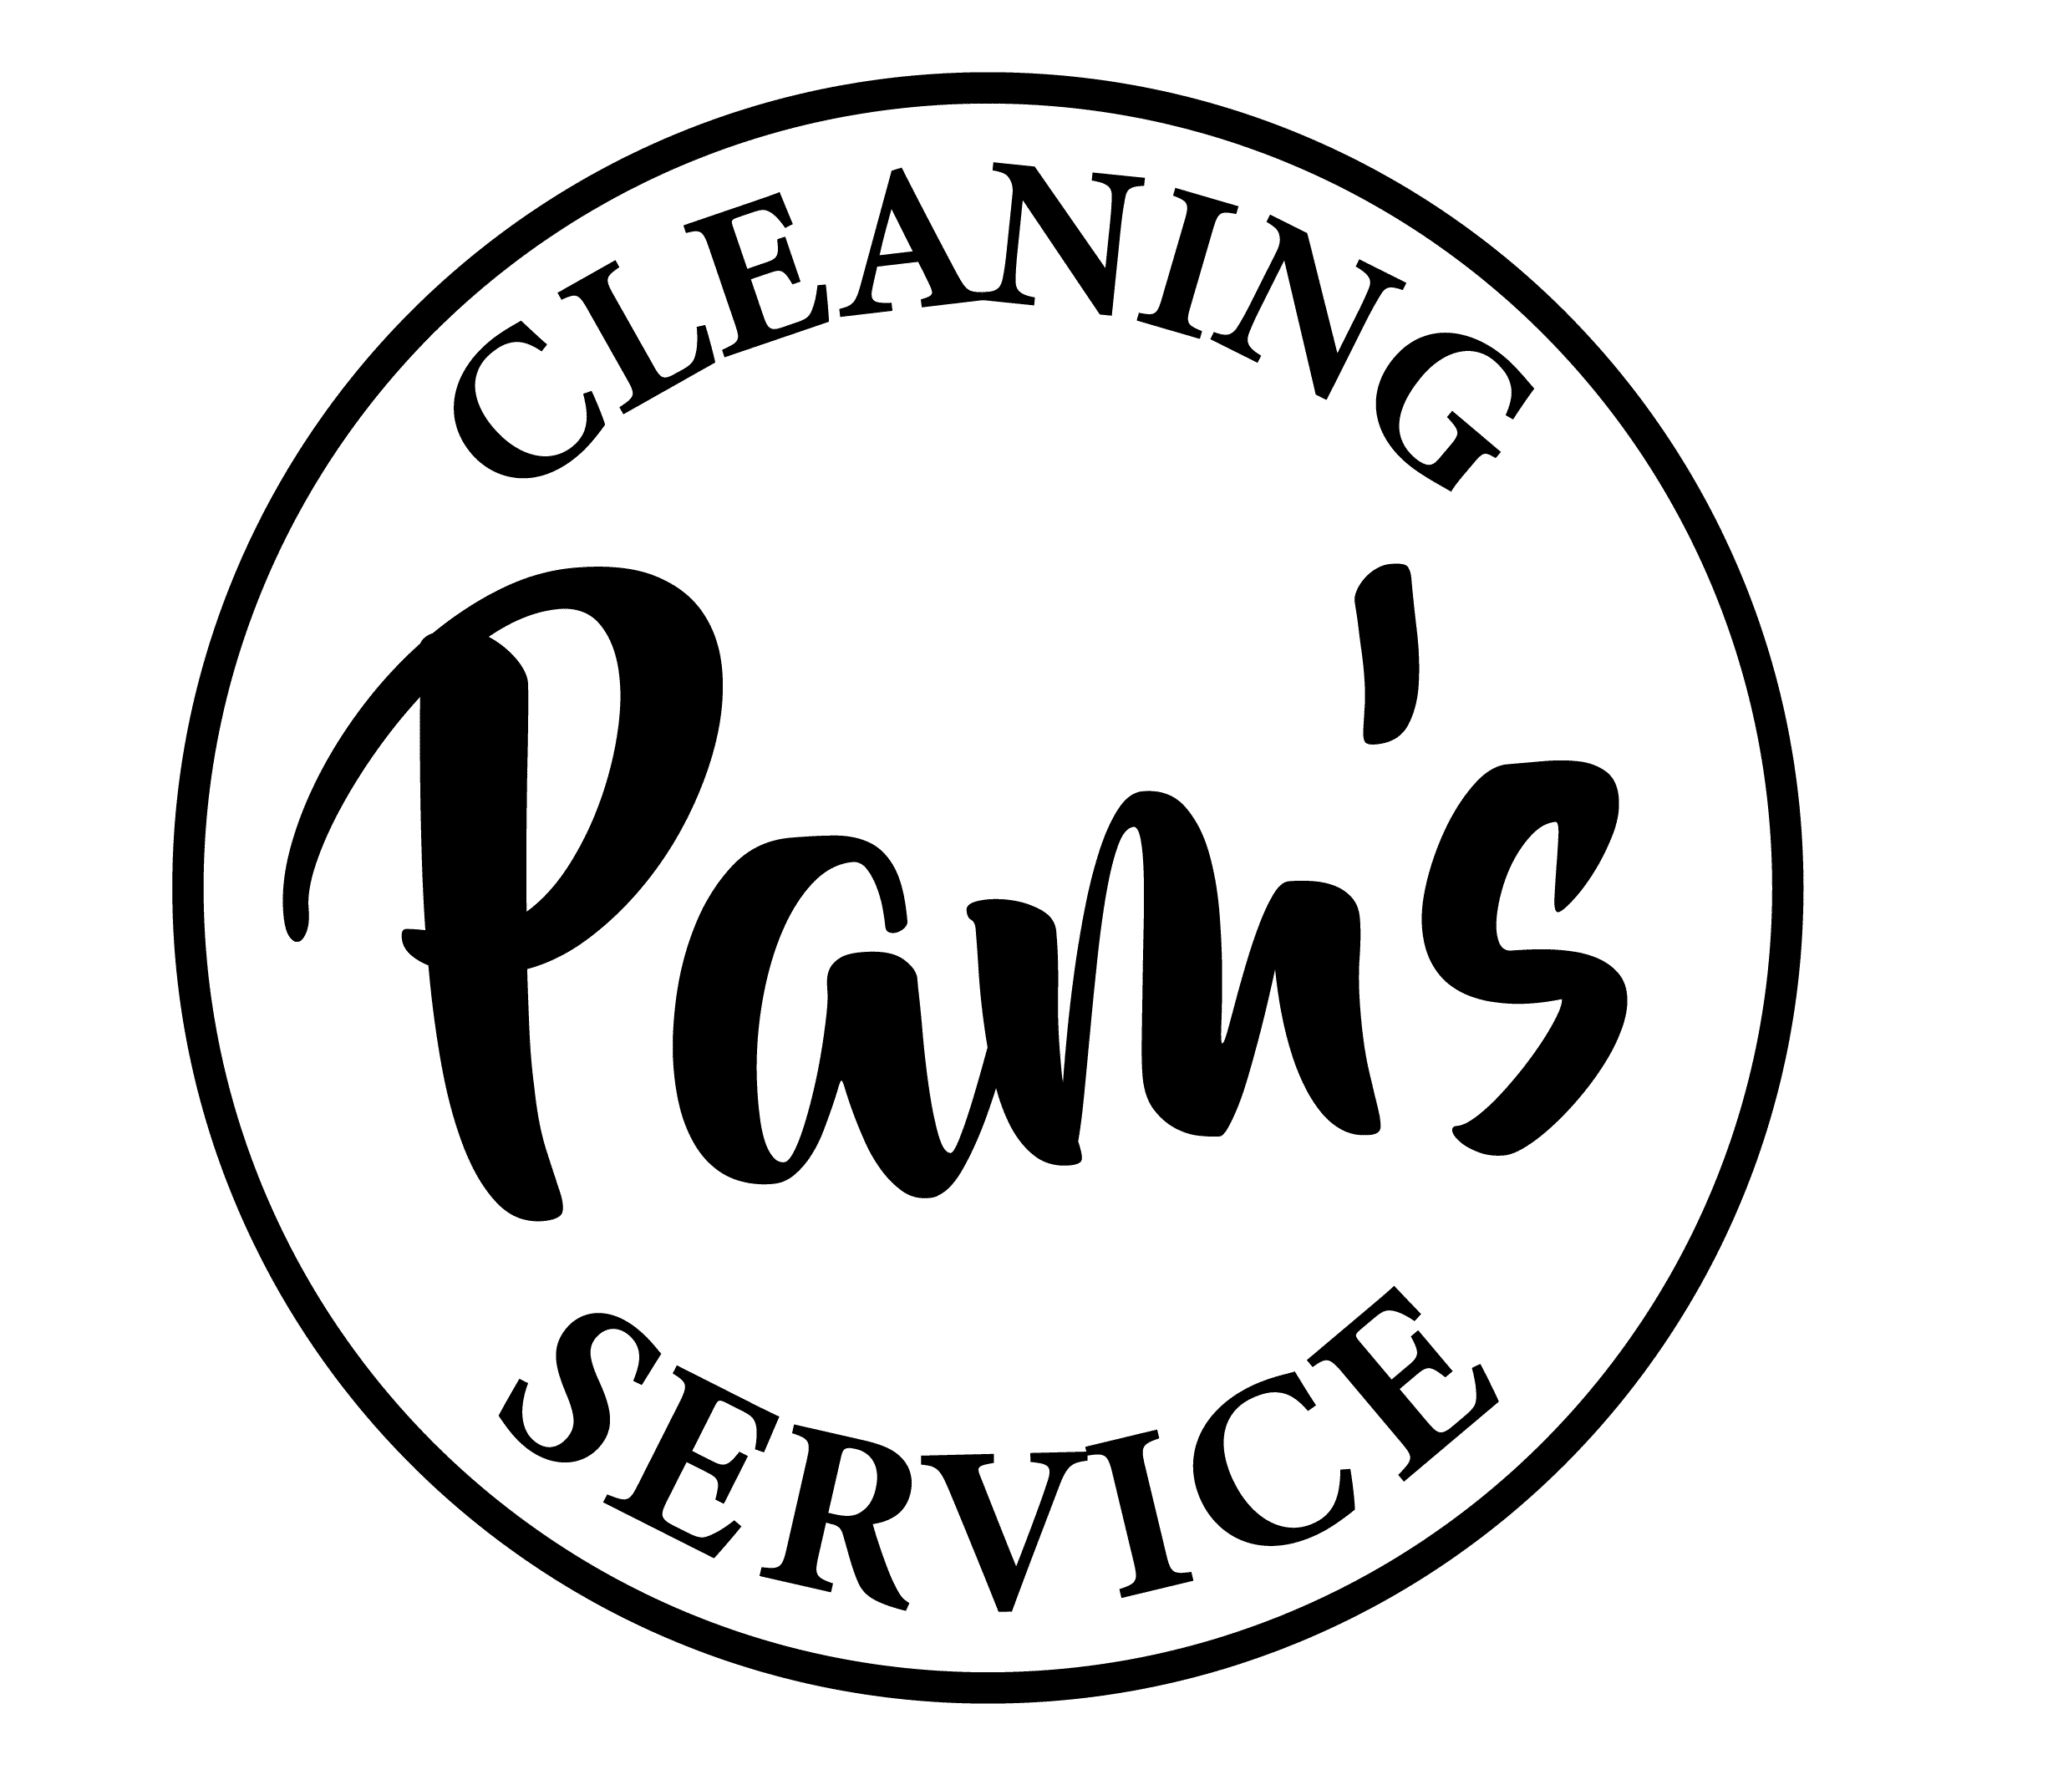 Pam's cleaning service